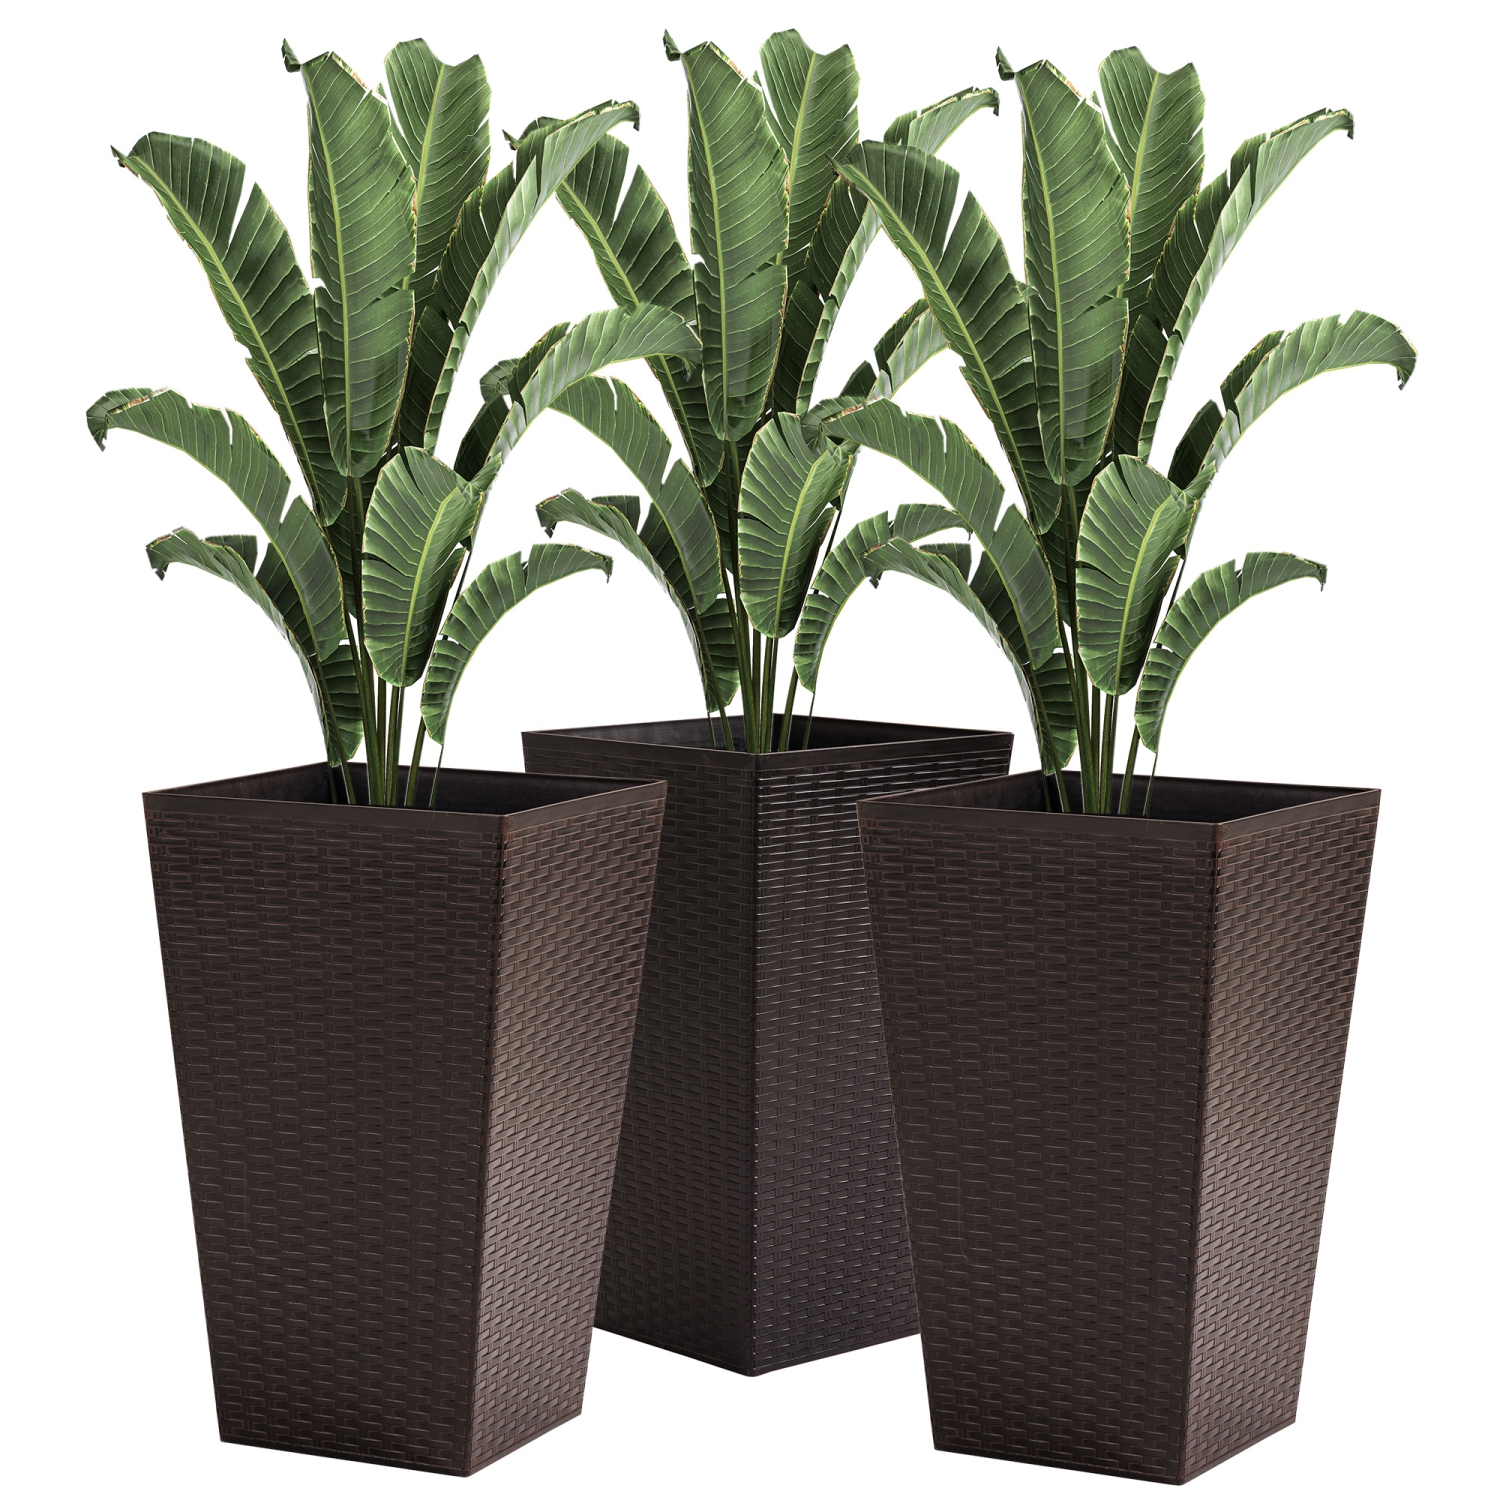 Outsunny Set of 3 Tall Planters with Drainage Hole, Outdoor